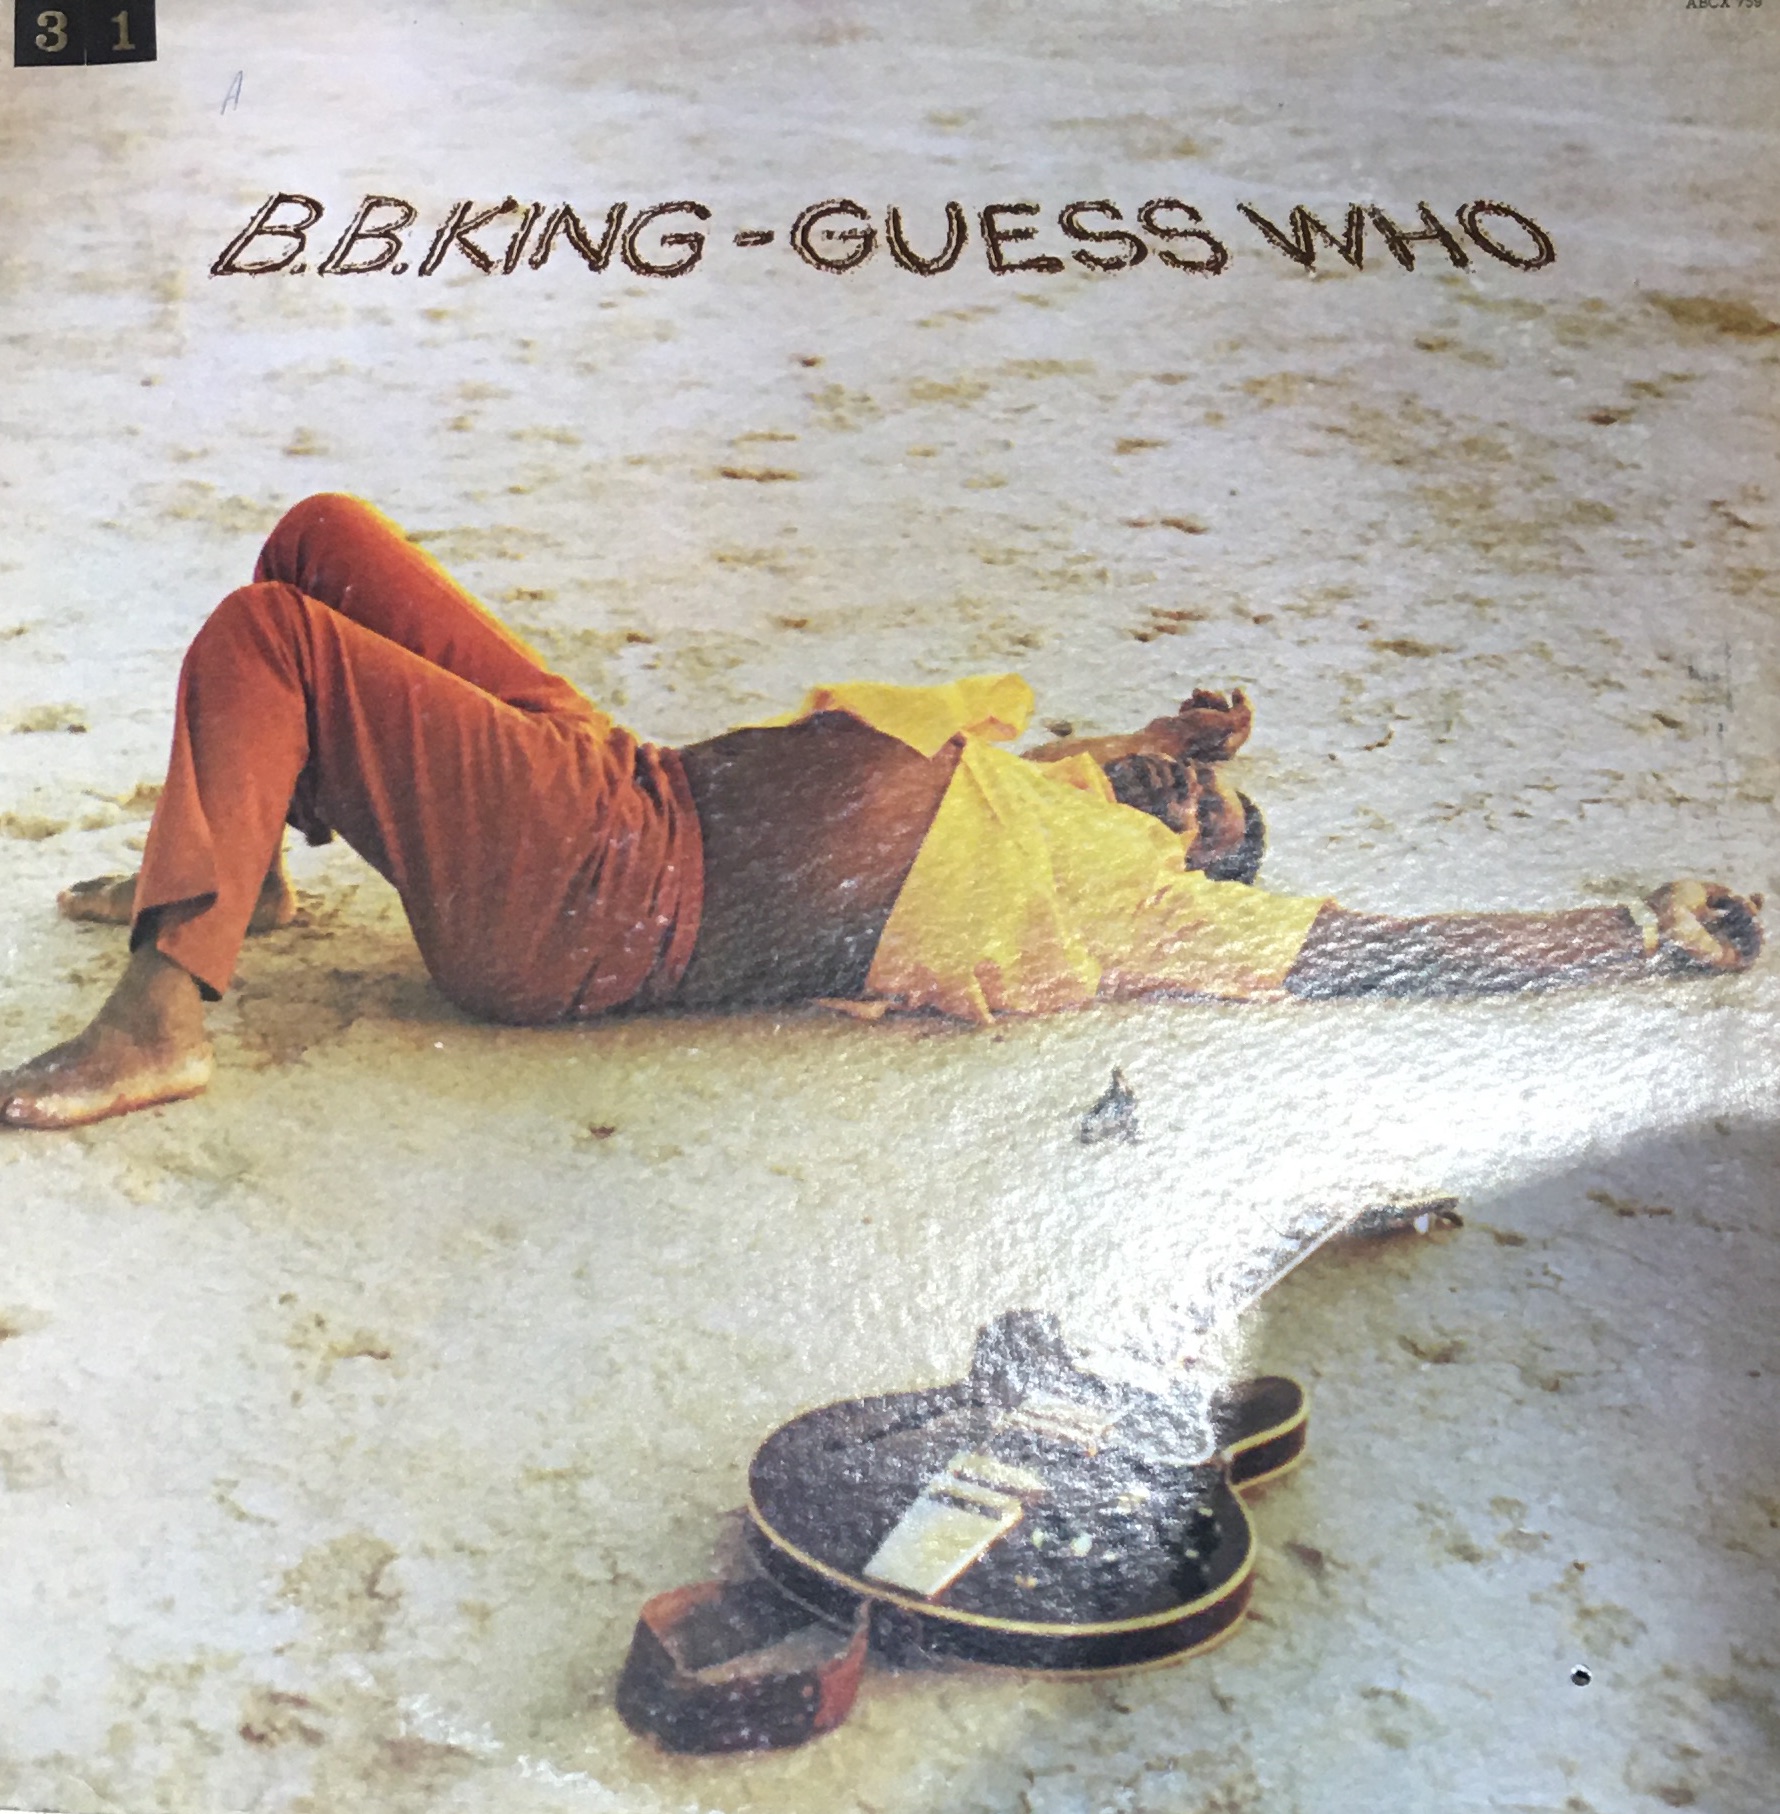 B.B. King, Guess Who, (Blues - LonDisc Records